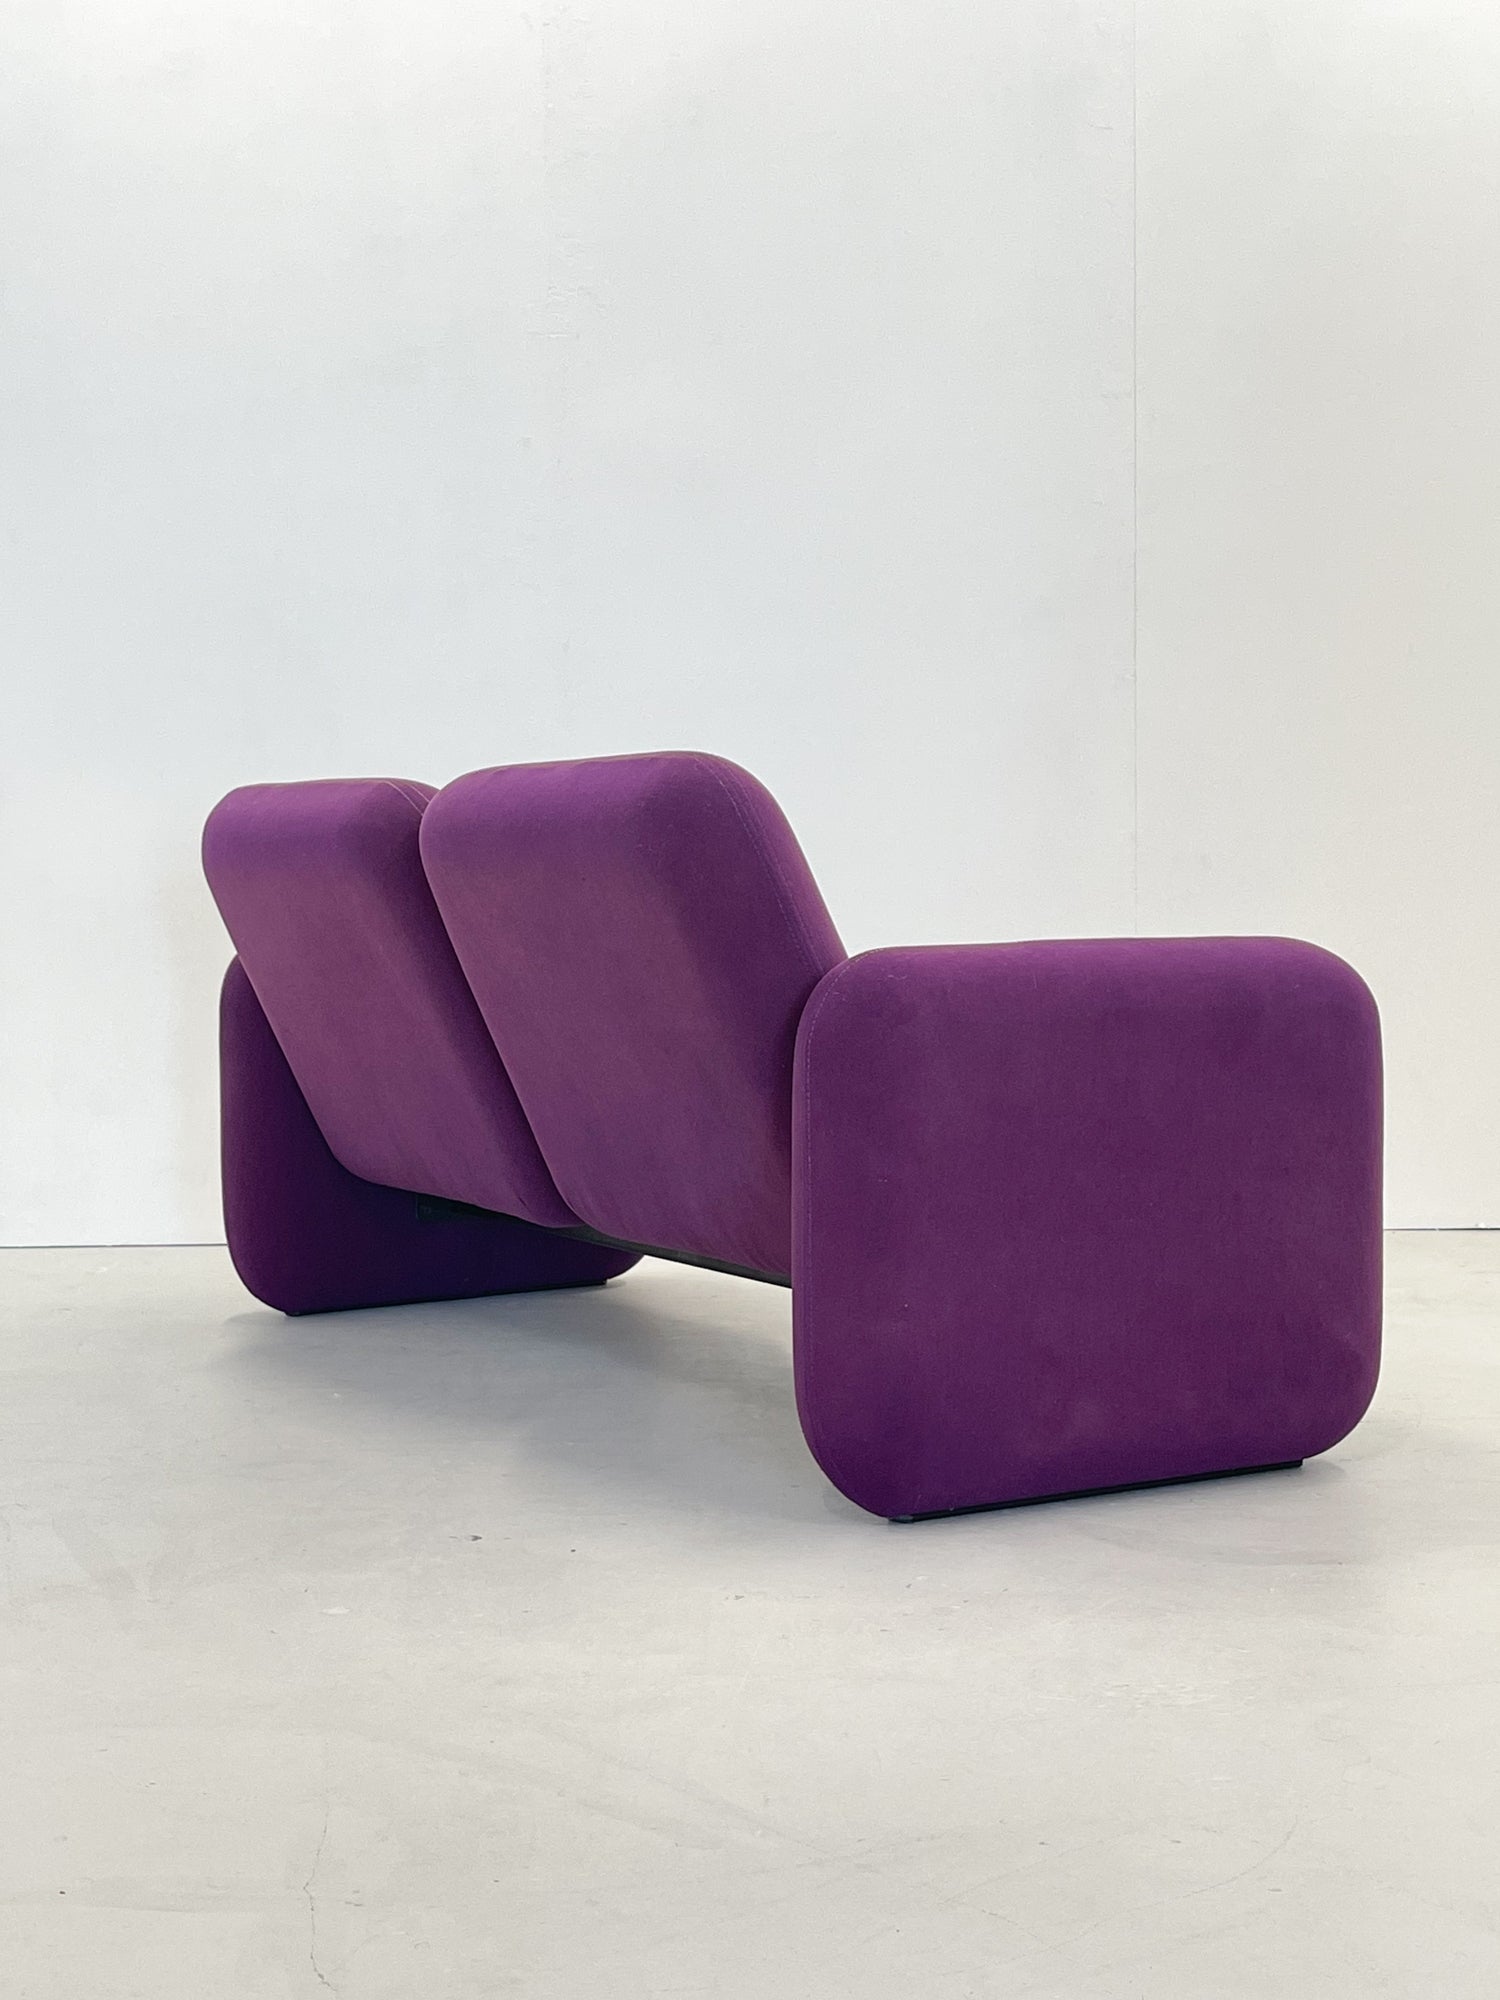 1970s 2-Seater Purple Chiclet Sofa by Ray Wilkes for Herman Miller